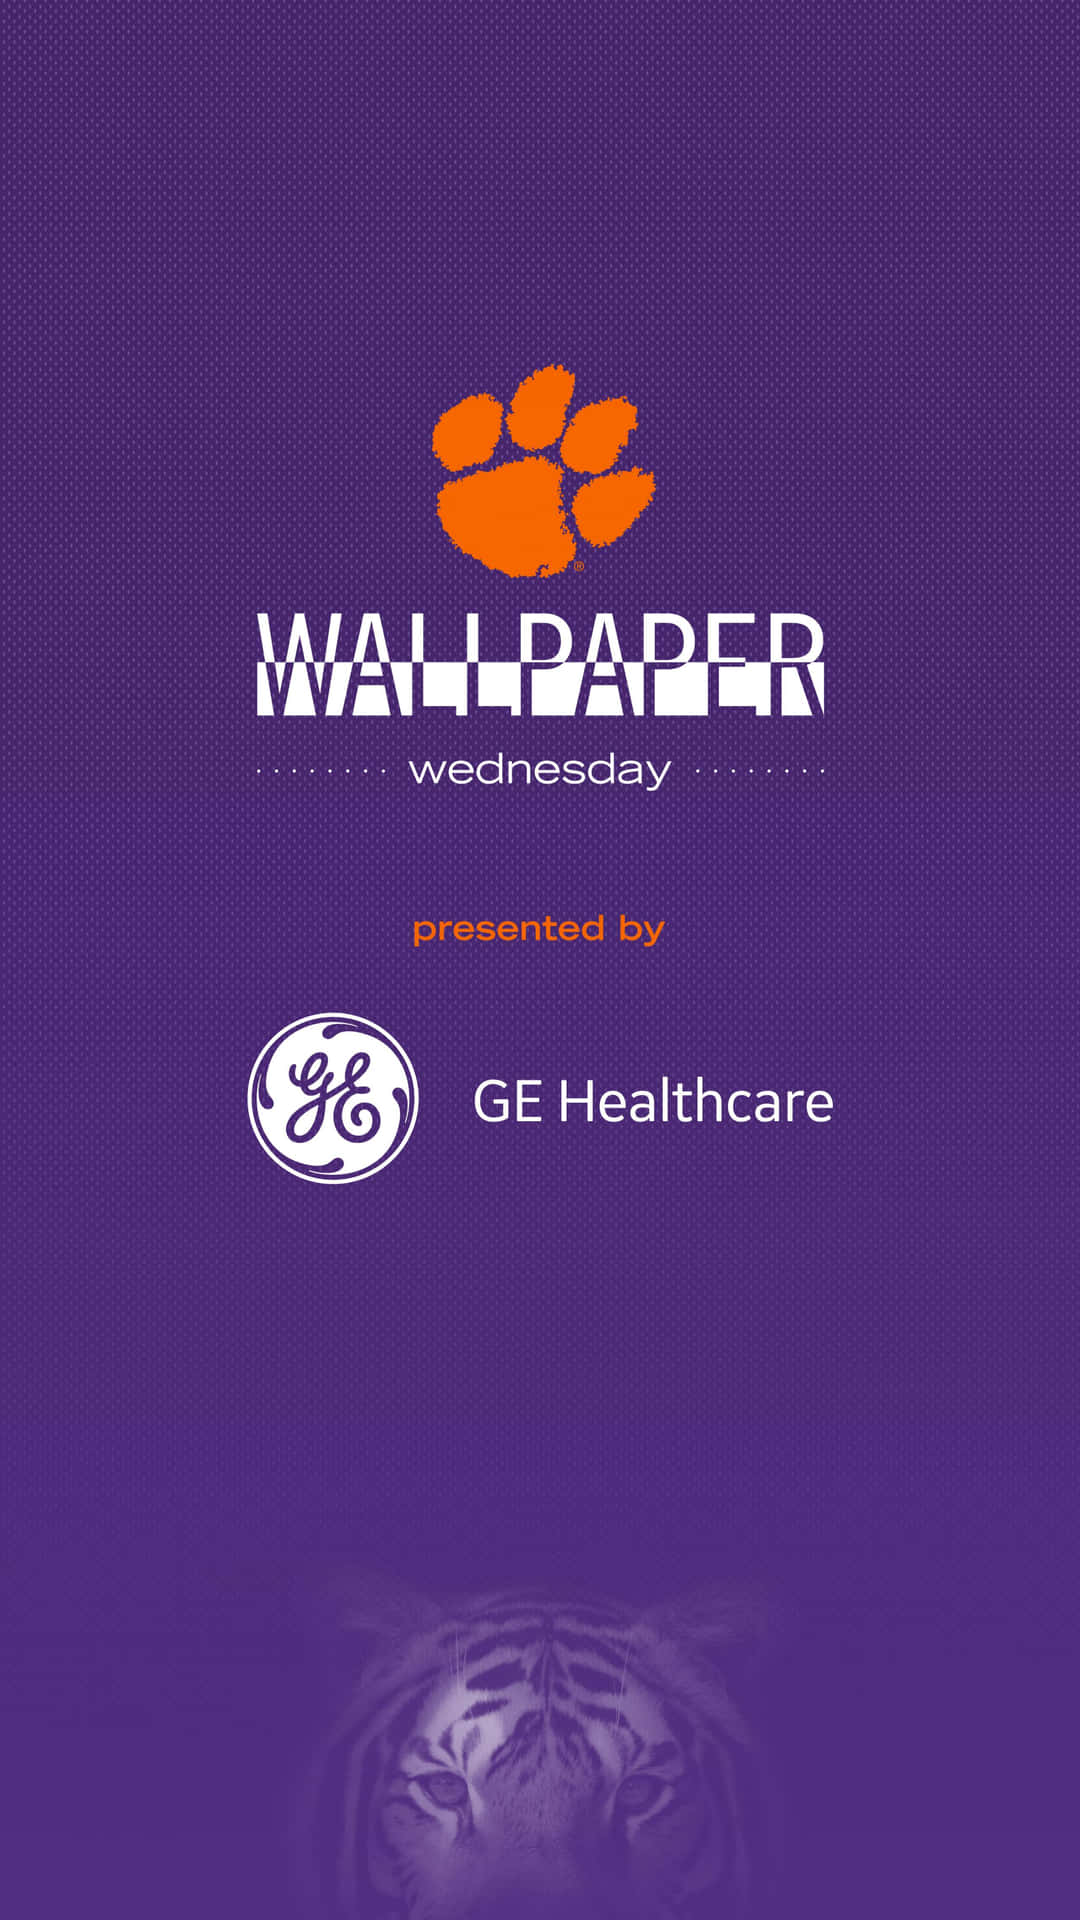 Get the most out of your new Clemson iPhone with exclusive features! Wallpaper